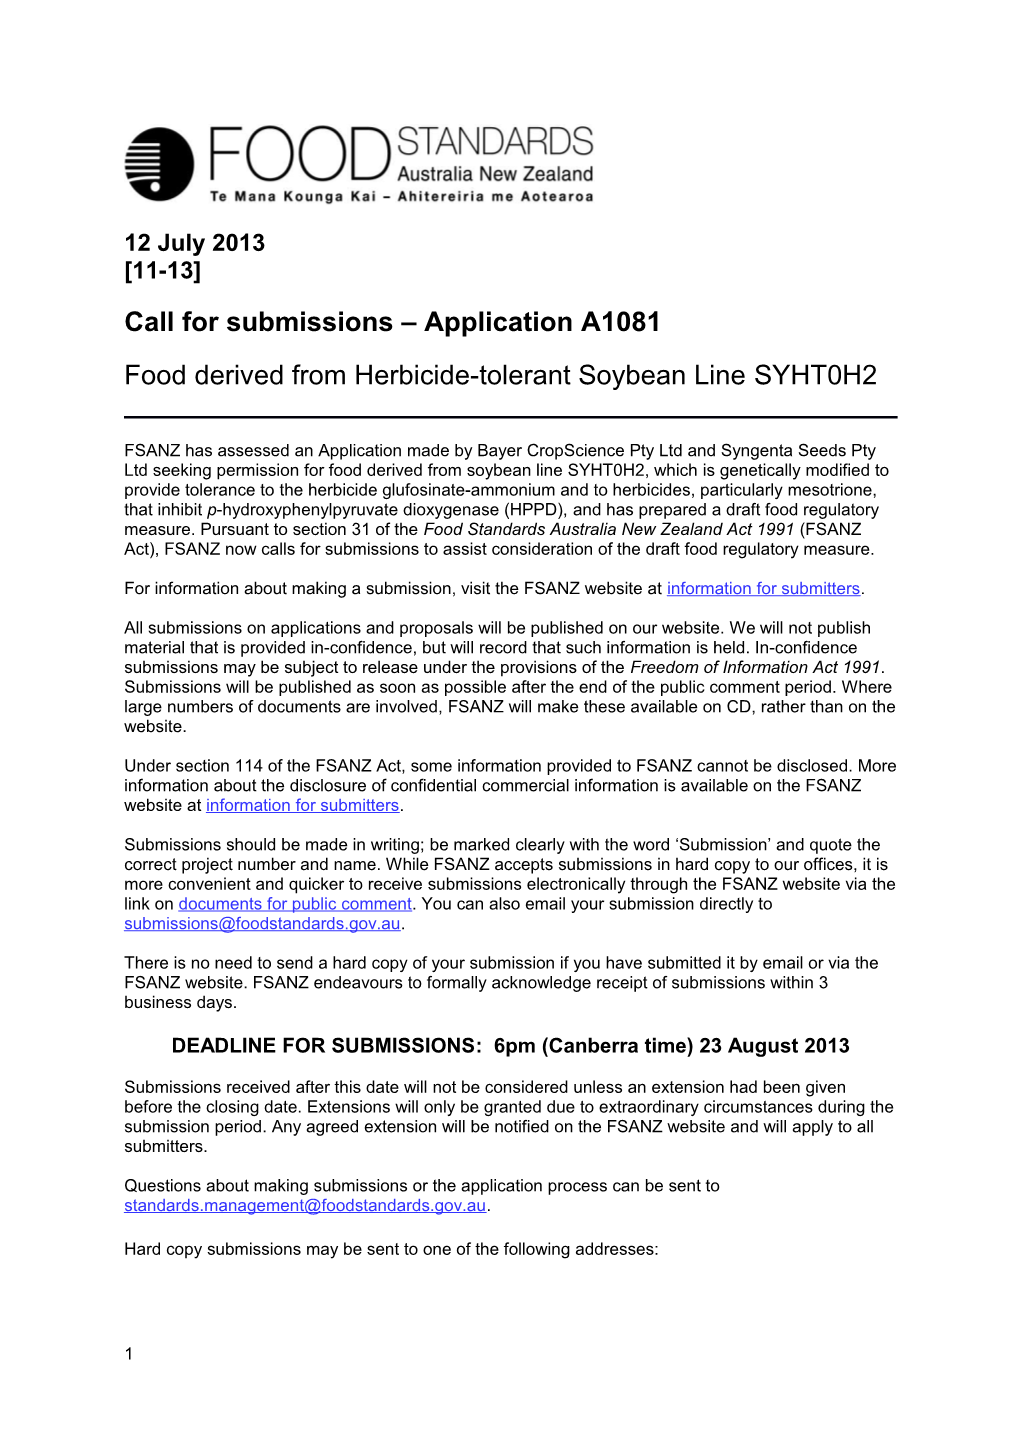 Food Derived from Herbicide-Tolerant Soybean Line SYHT0H2